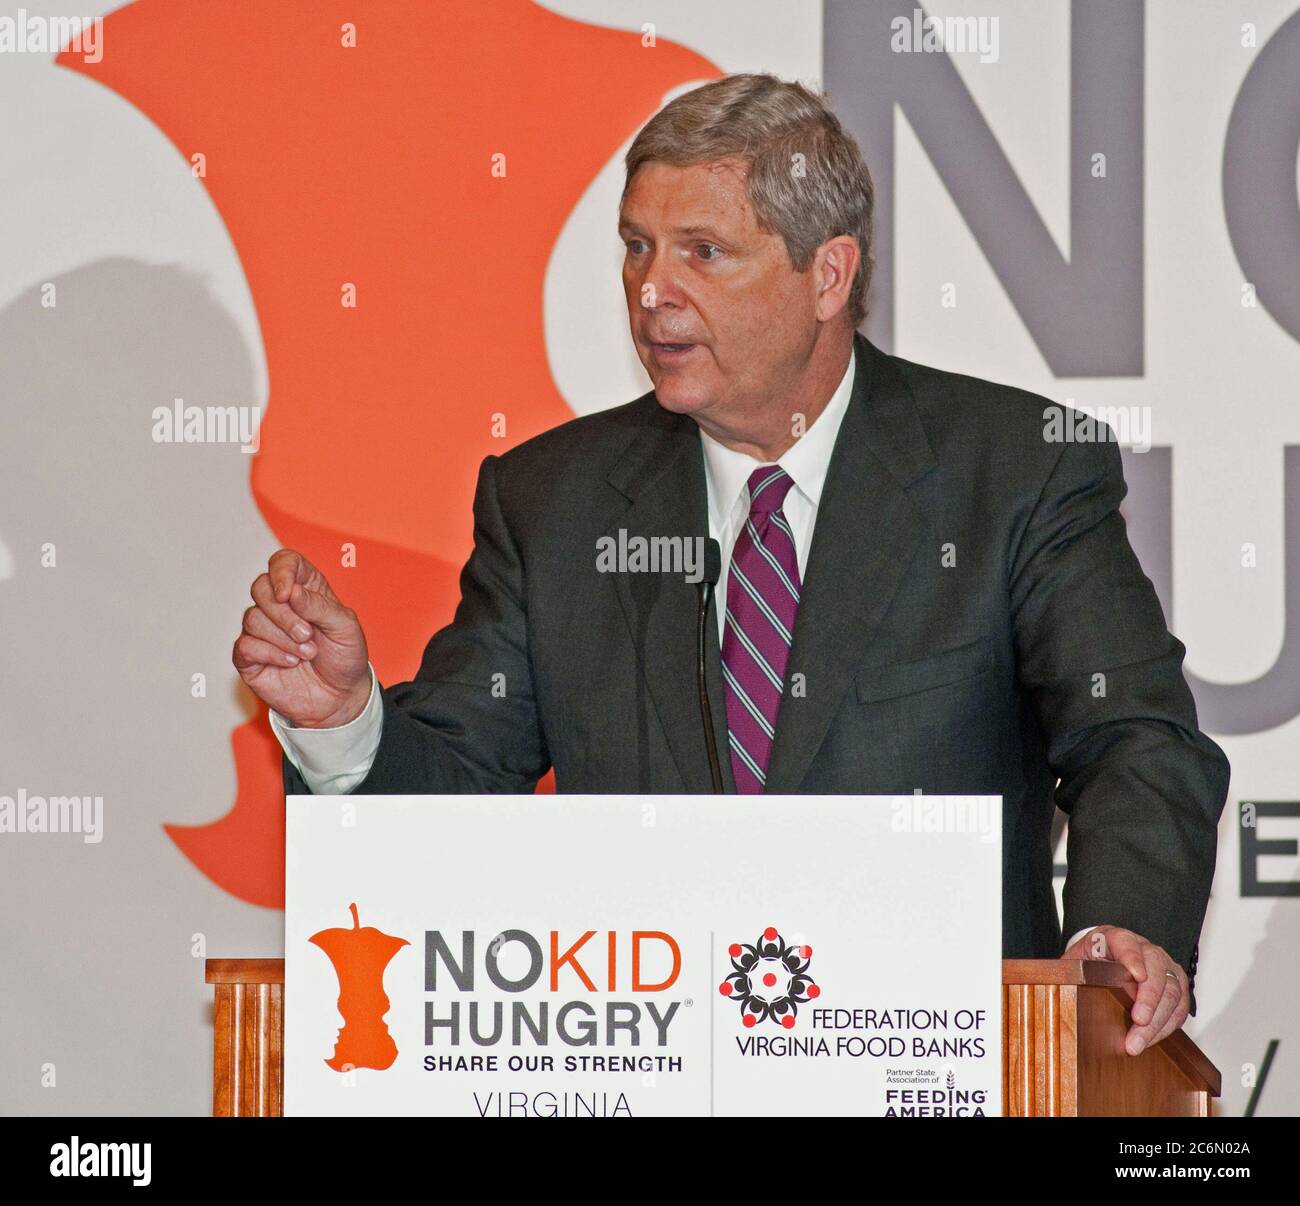 U.S. Department of Agriculture Secretary Tom Vilsack, helped launch the Virginia No Kid Hungry Campaign at Barcroft Elementary School in Arlington, VA, Tuesday, June 7, 2011. Vilsack said, “ We know our strength comes from out partnerships…” Campaign partners include Share our Strength, the Federation of Virginia Food Banks, corporate partners, education leaders, government agencies and community organizations. The Virginia Summer Meals for Kids Program is funded by the USDA and provides free summer meals at hundreds of sites across the Commonwealth of Virginia, but according to a new report r Stock Photo